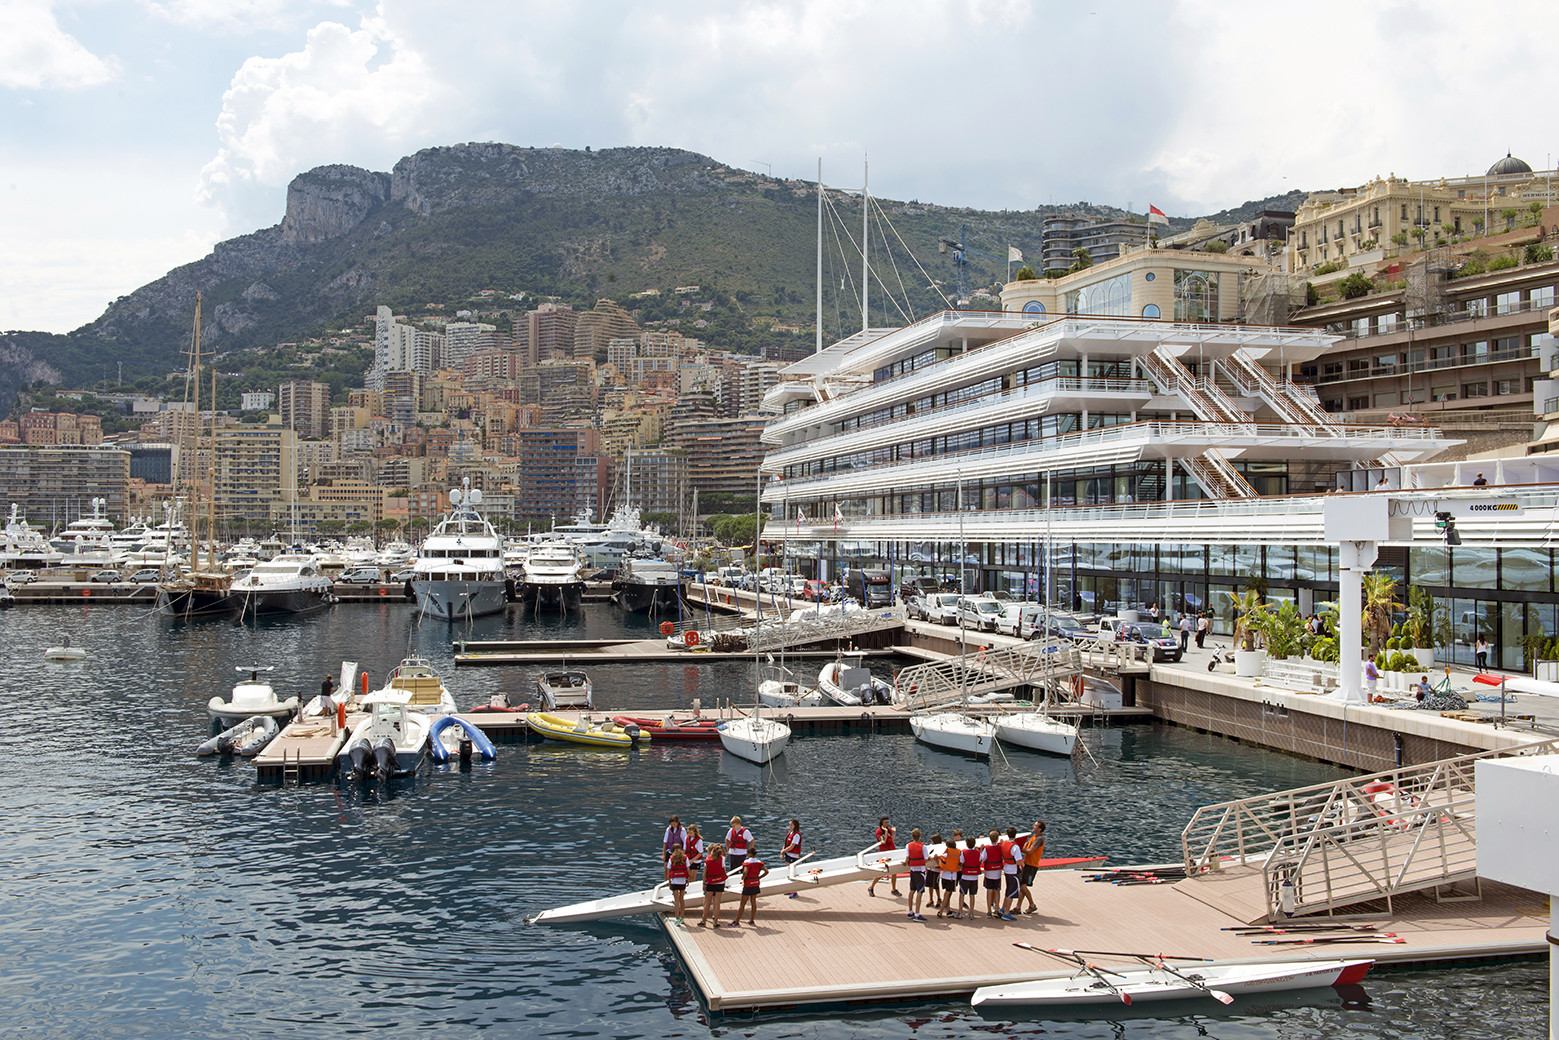 Partnership of Tenzor Consulting Group and Yacht club de Monaco